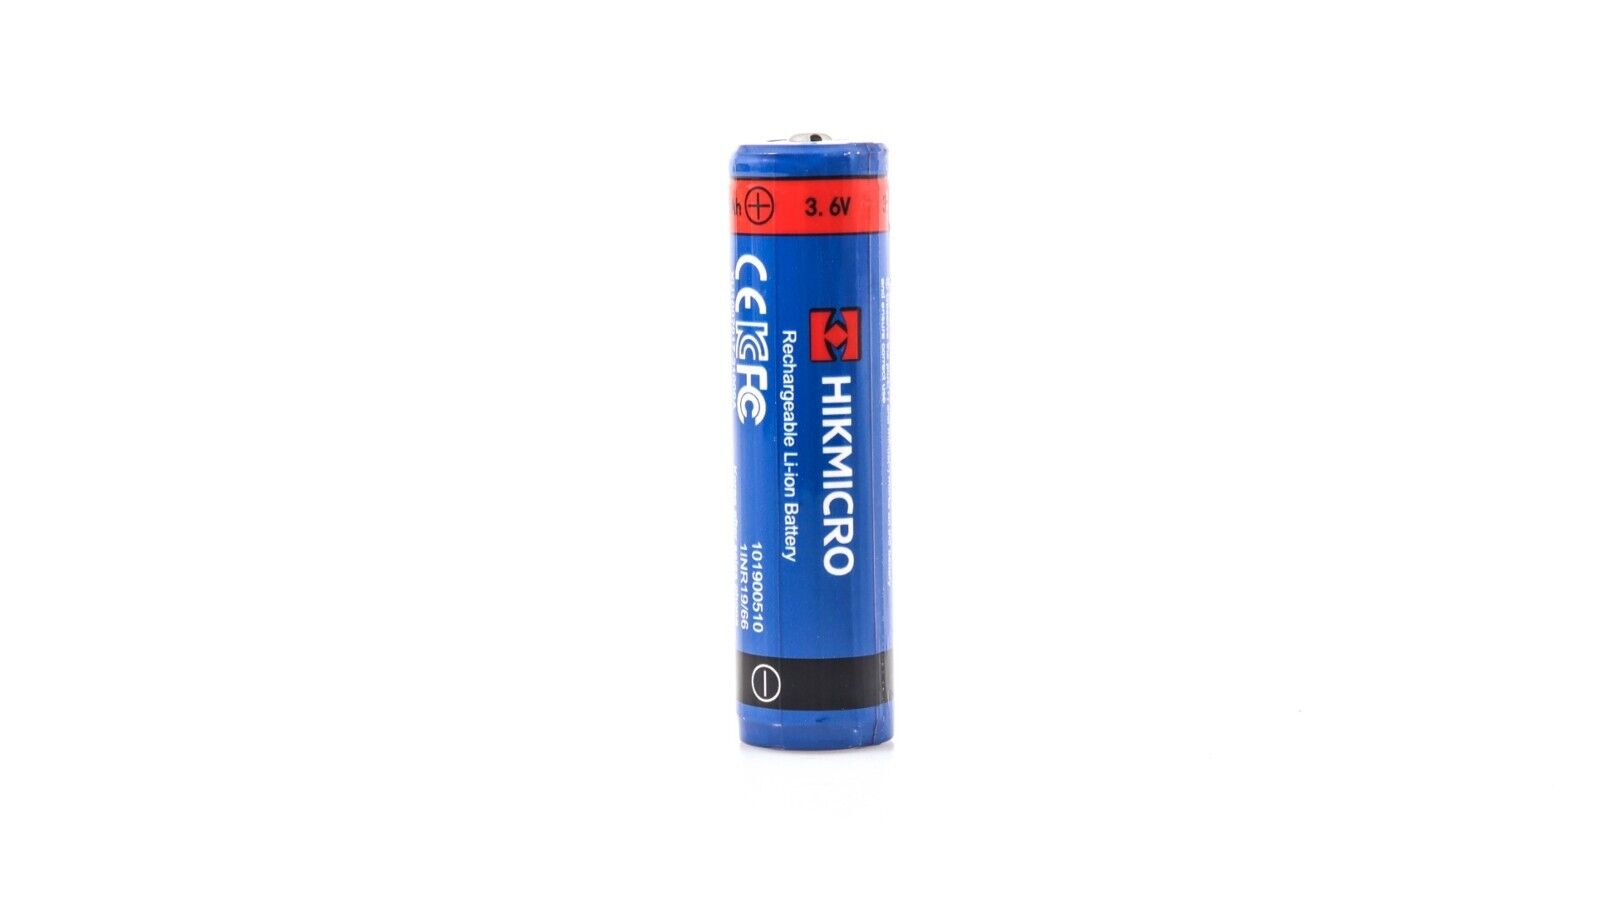 HIKMICRO 18650 Rechargeable Battery